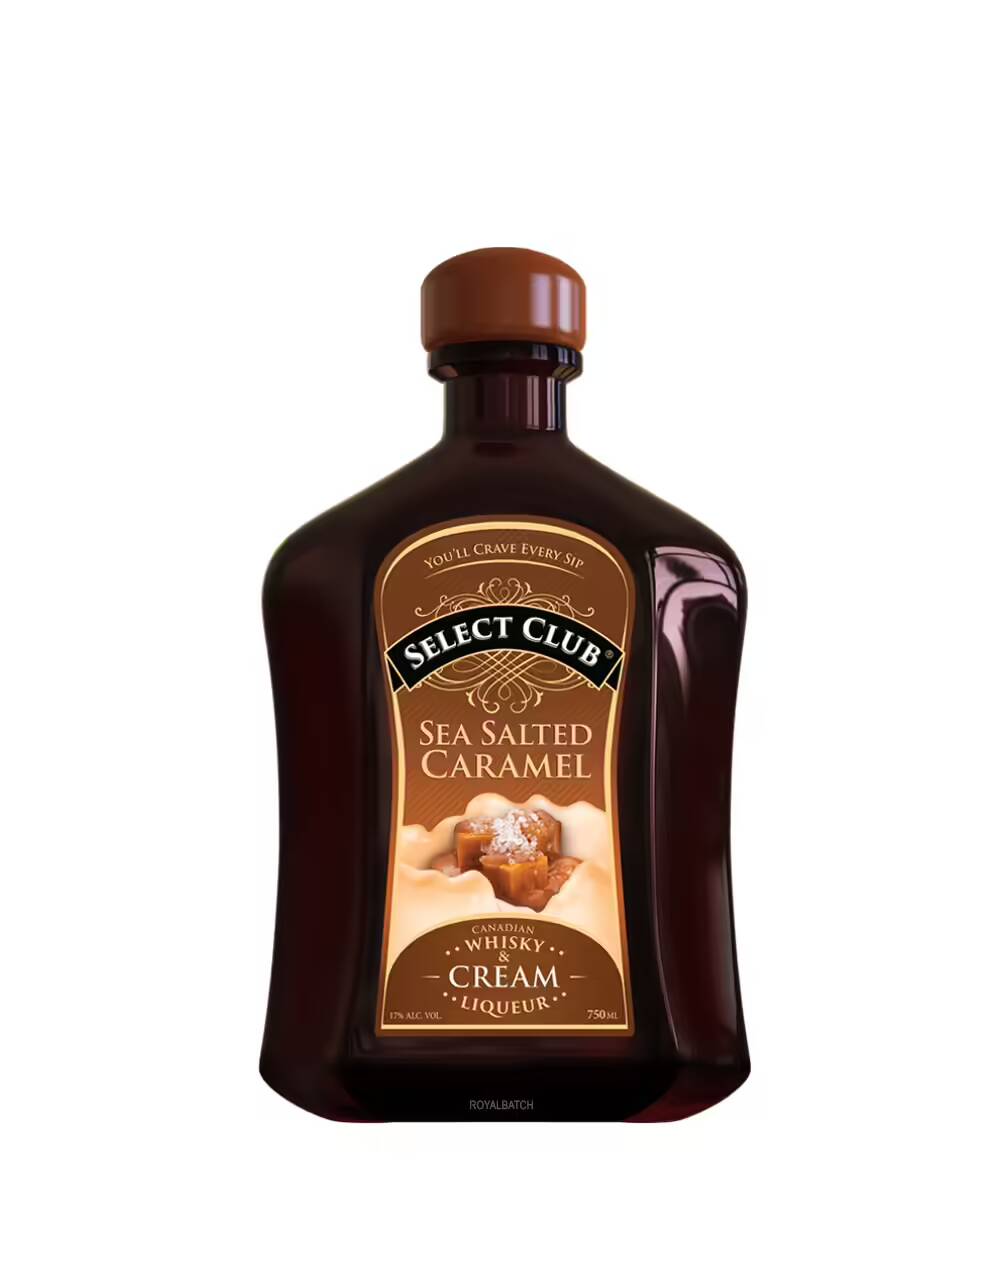 Select Club Sea Salted Caramel Canadian Whisky and Cream Liqueur